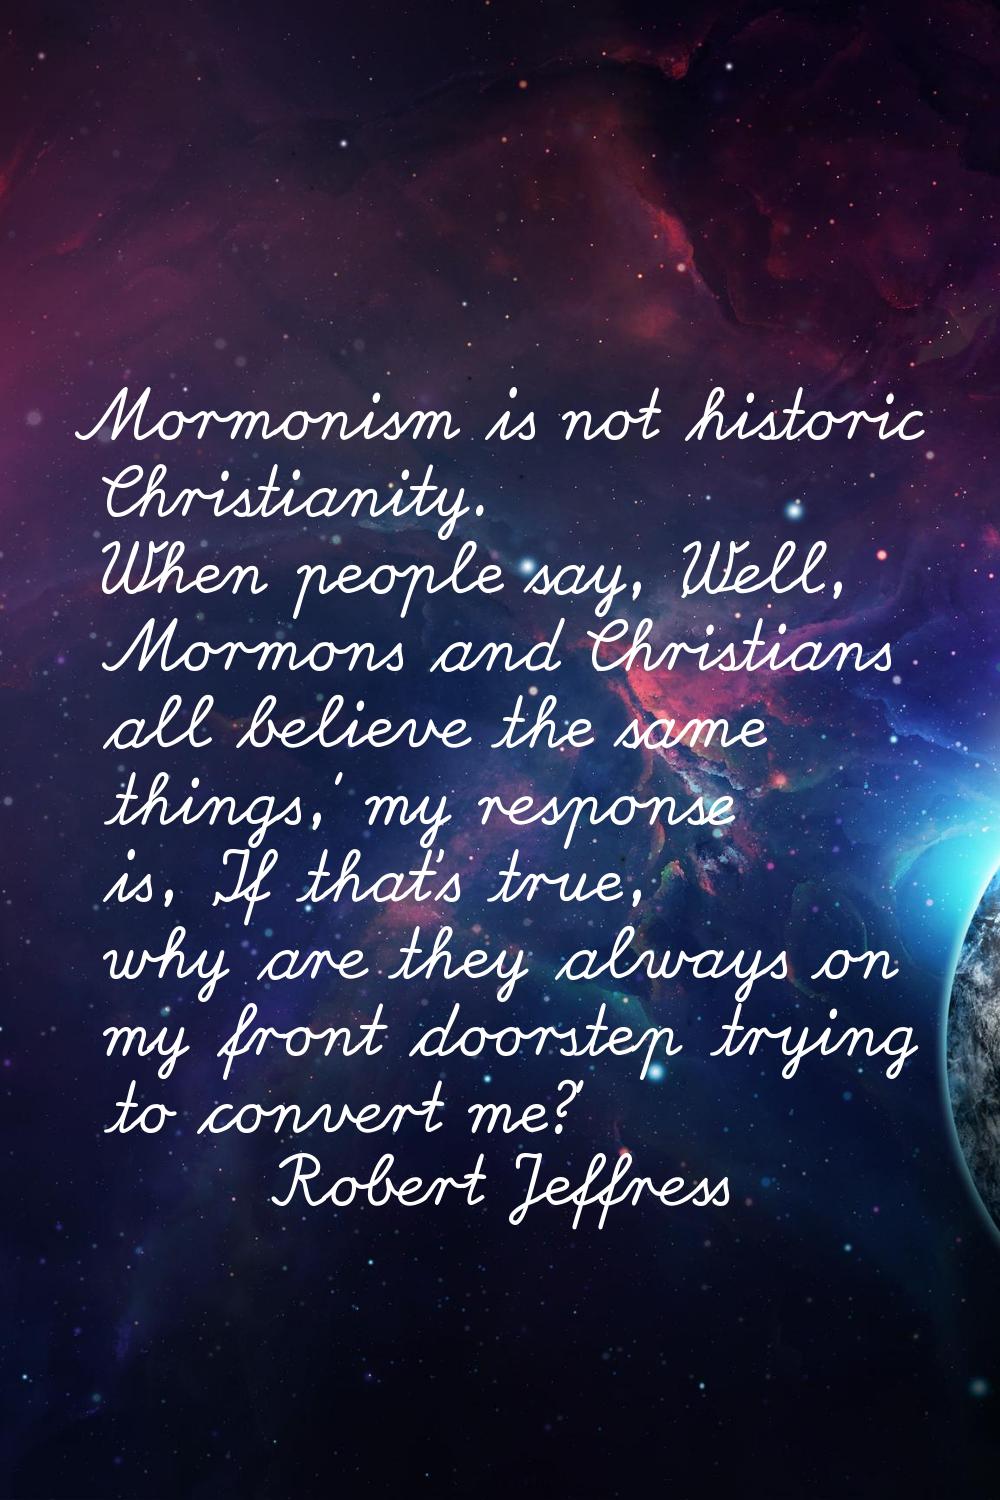 Mormonism is not historic Christianity. When people say, 'Well, Mormons and Christians all believe 